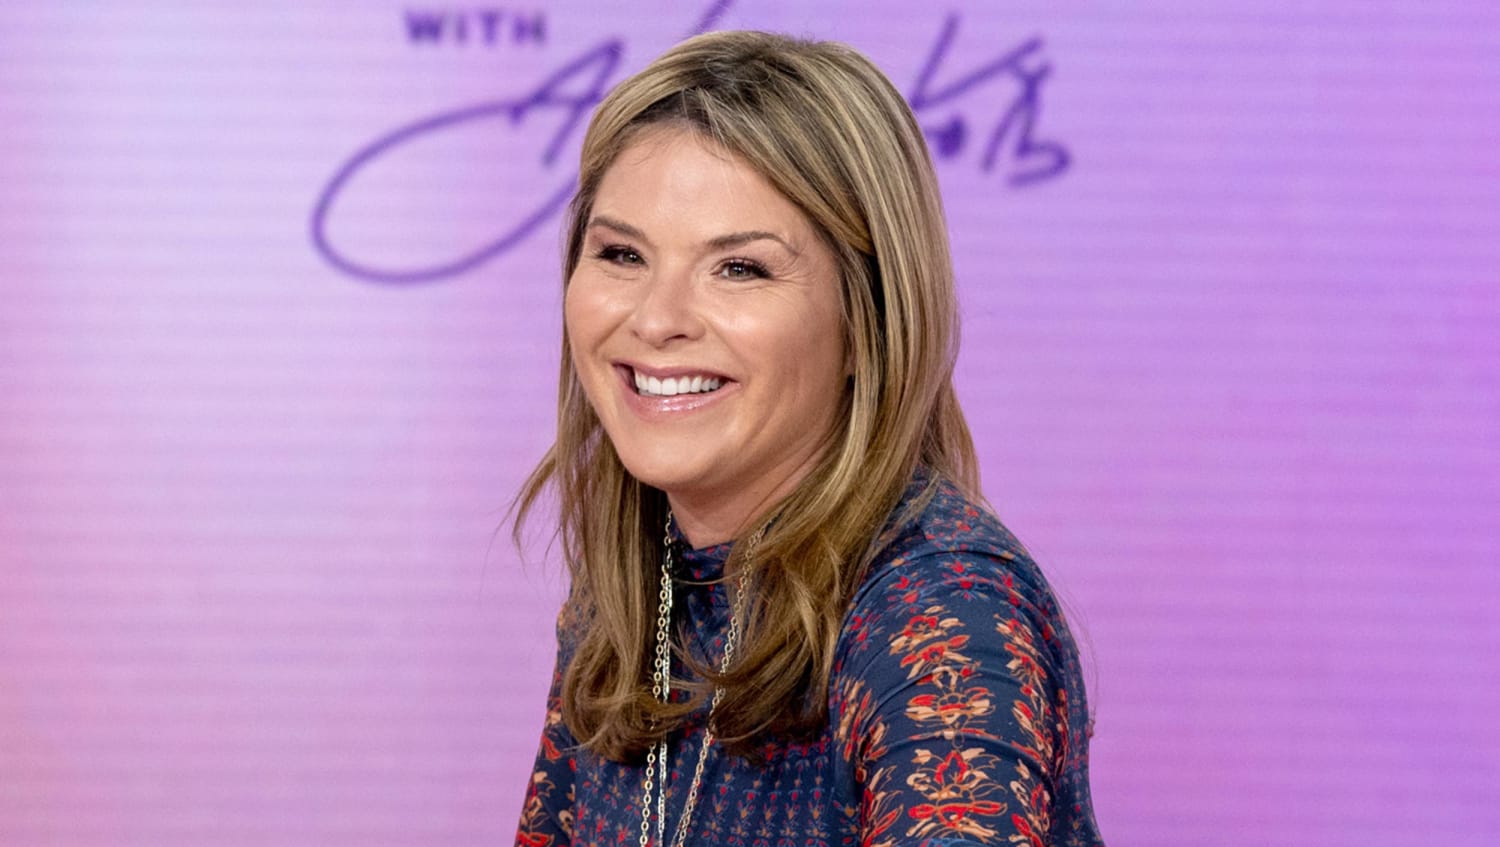 Jenna Bush Hager shares family's April Fools pranks filled with ... poop and pee